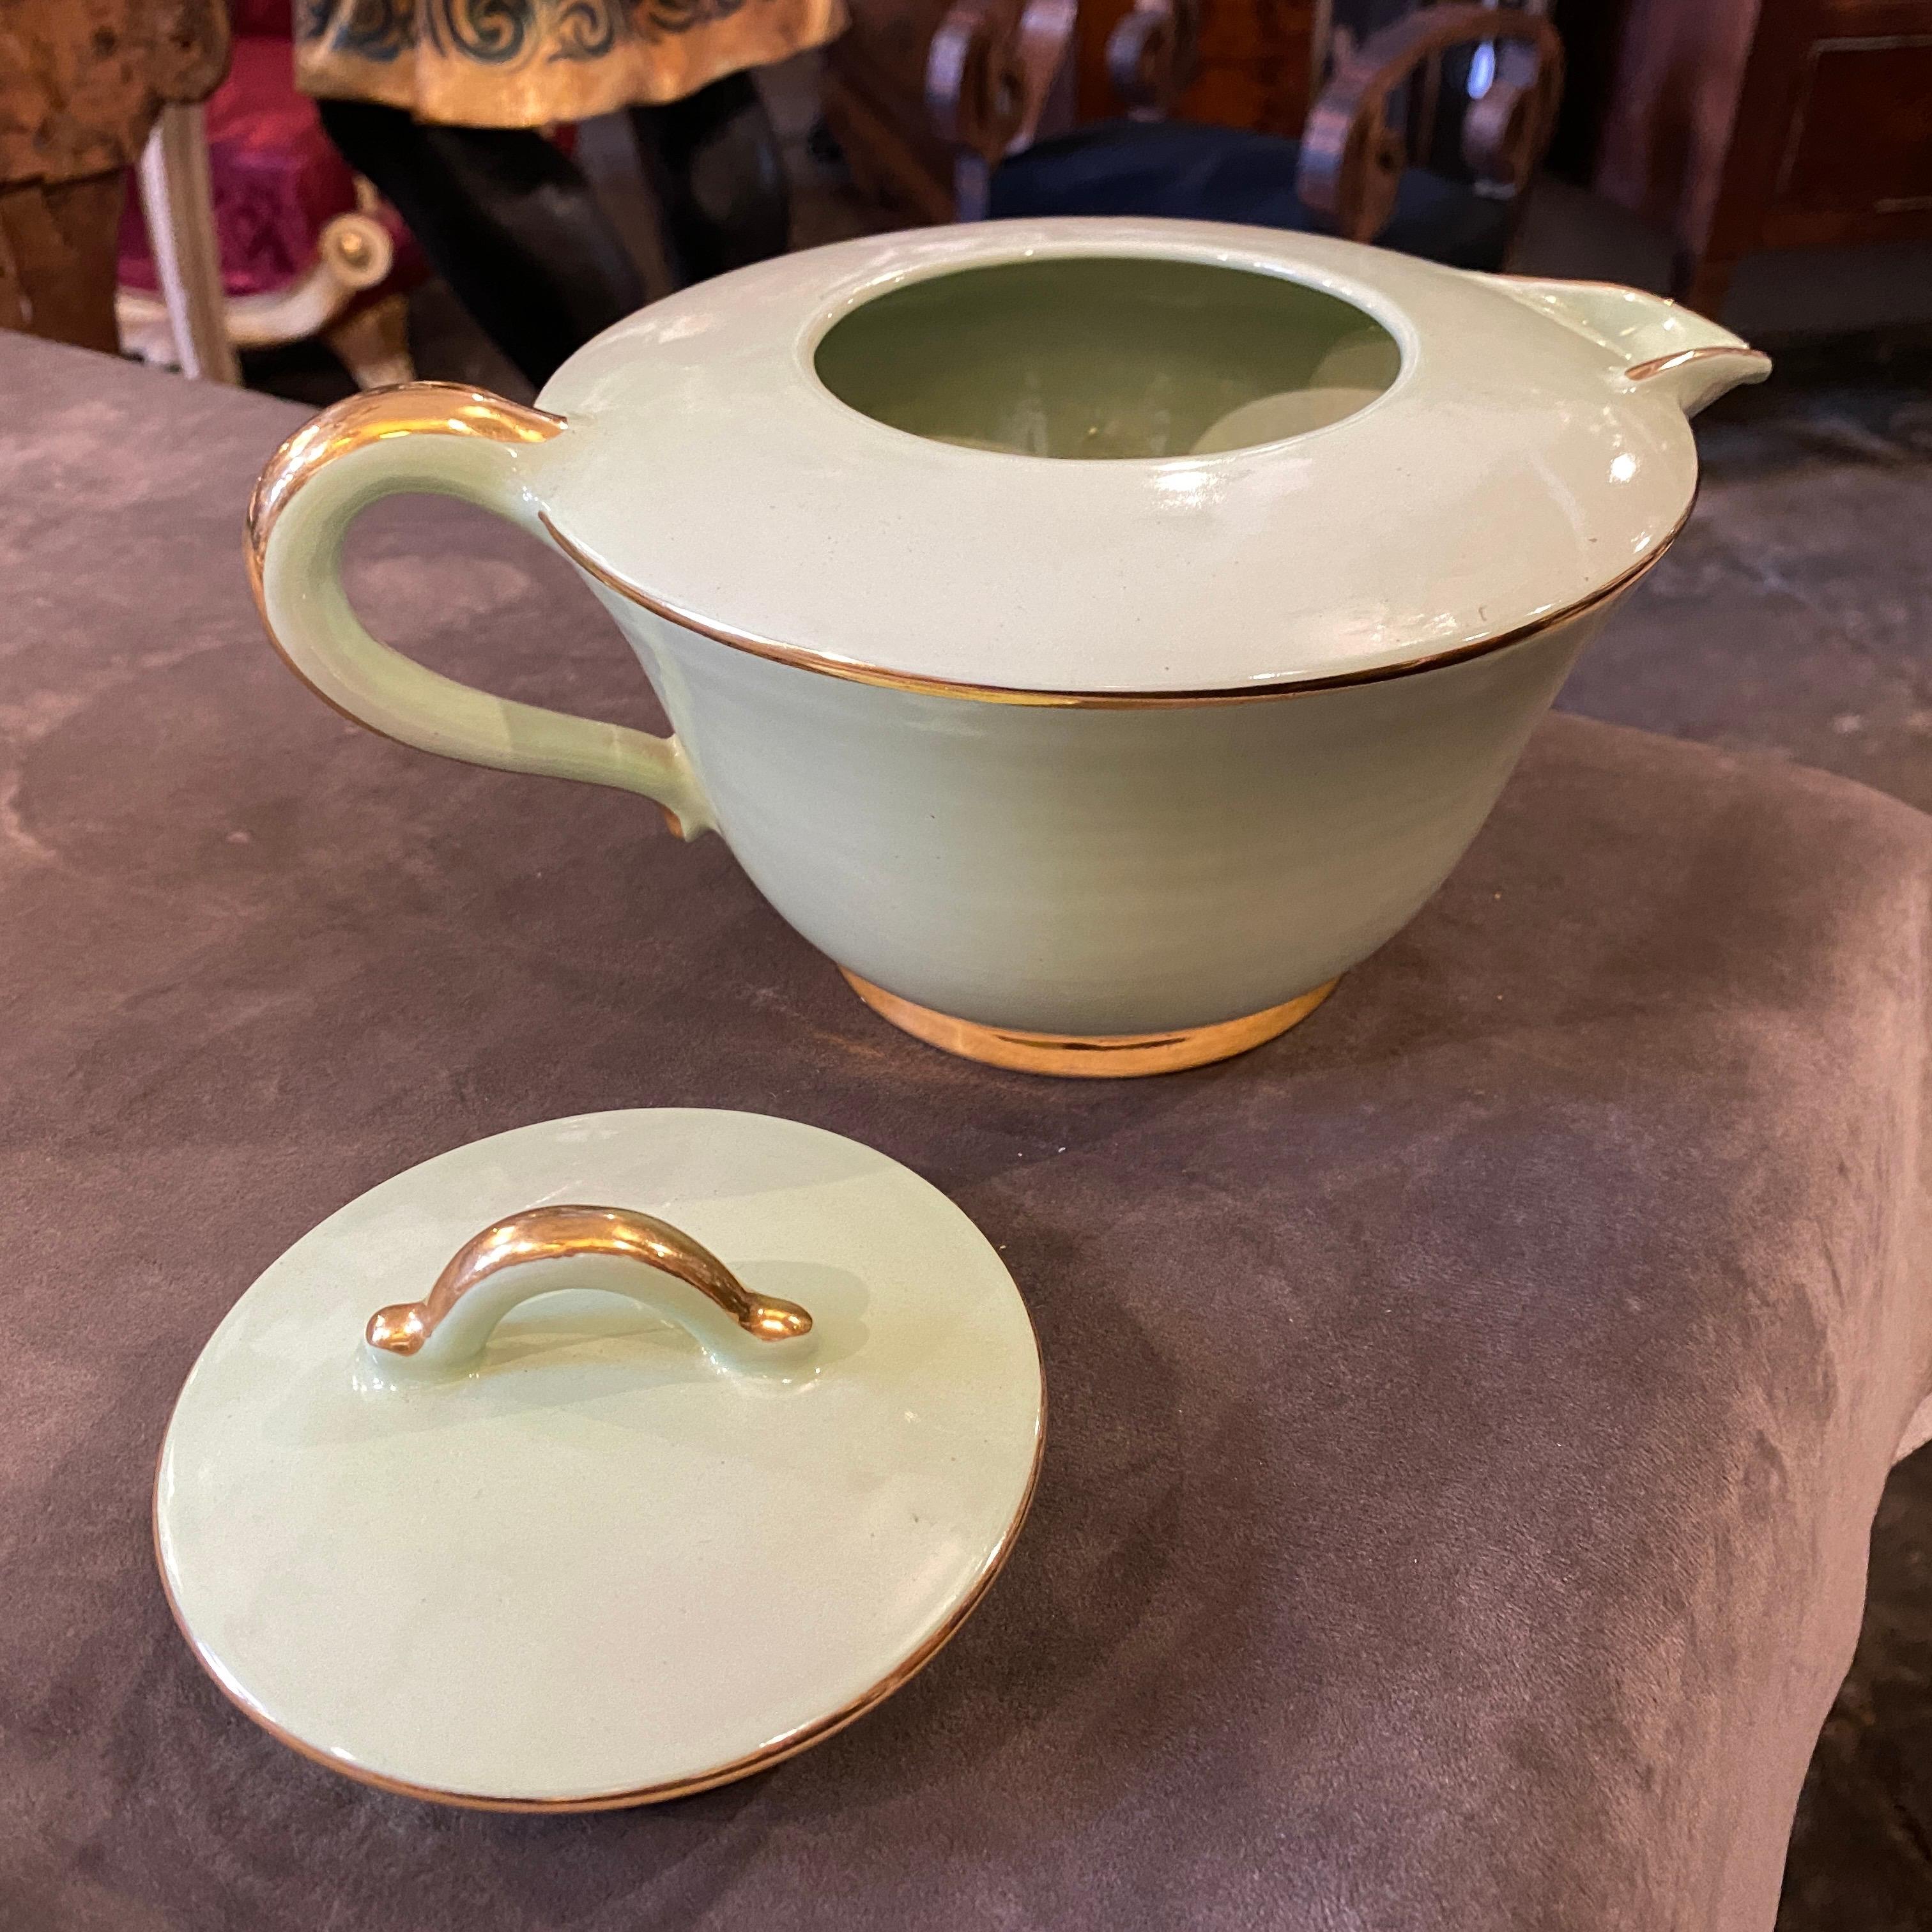 1960s Mid-Century Modern Green and Gold Ceramic Tea Pot by Pucci Umbertide In Good Condition For Sale In Aci Castello, IT